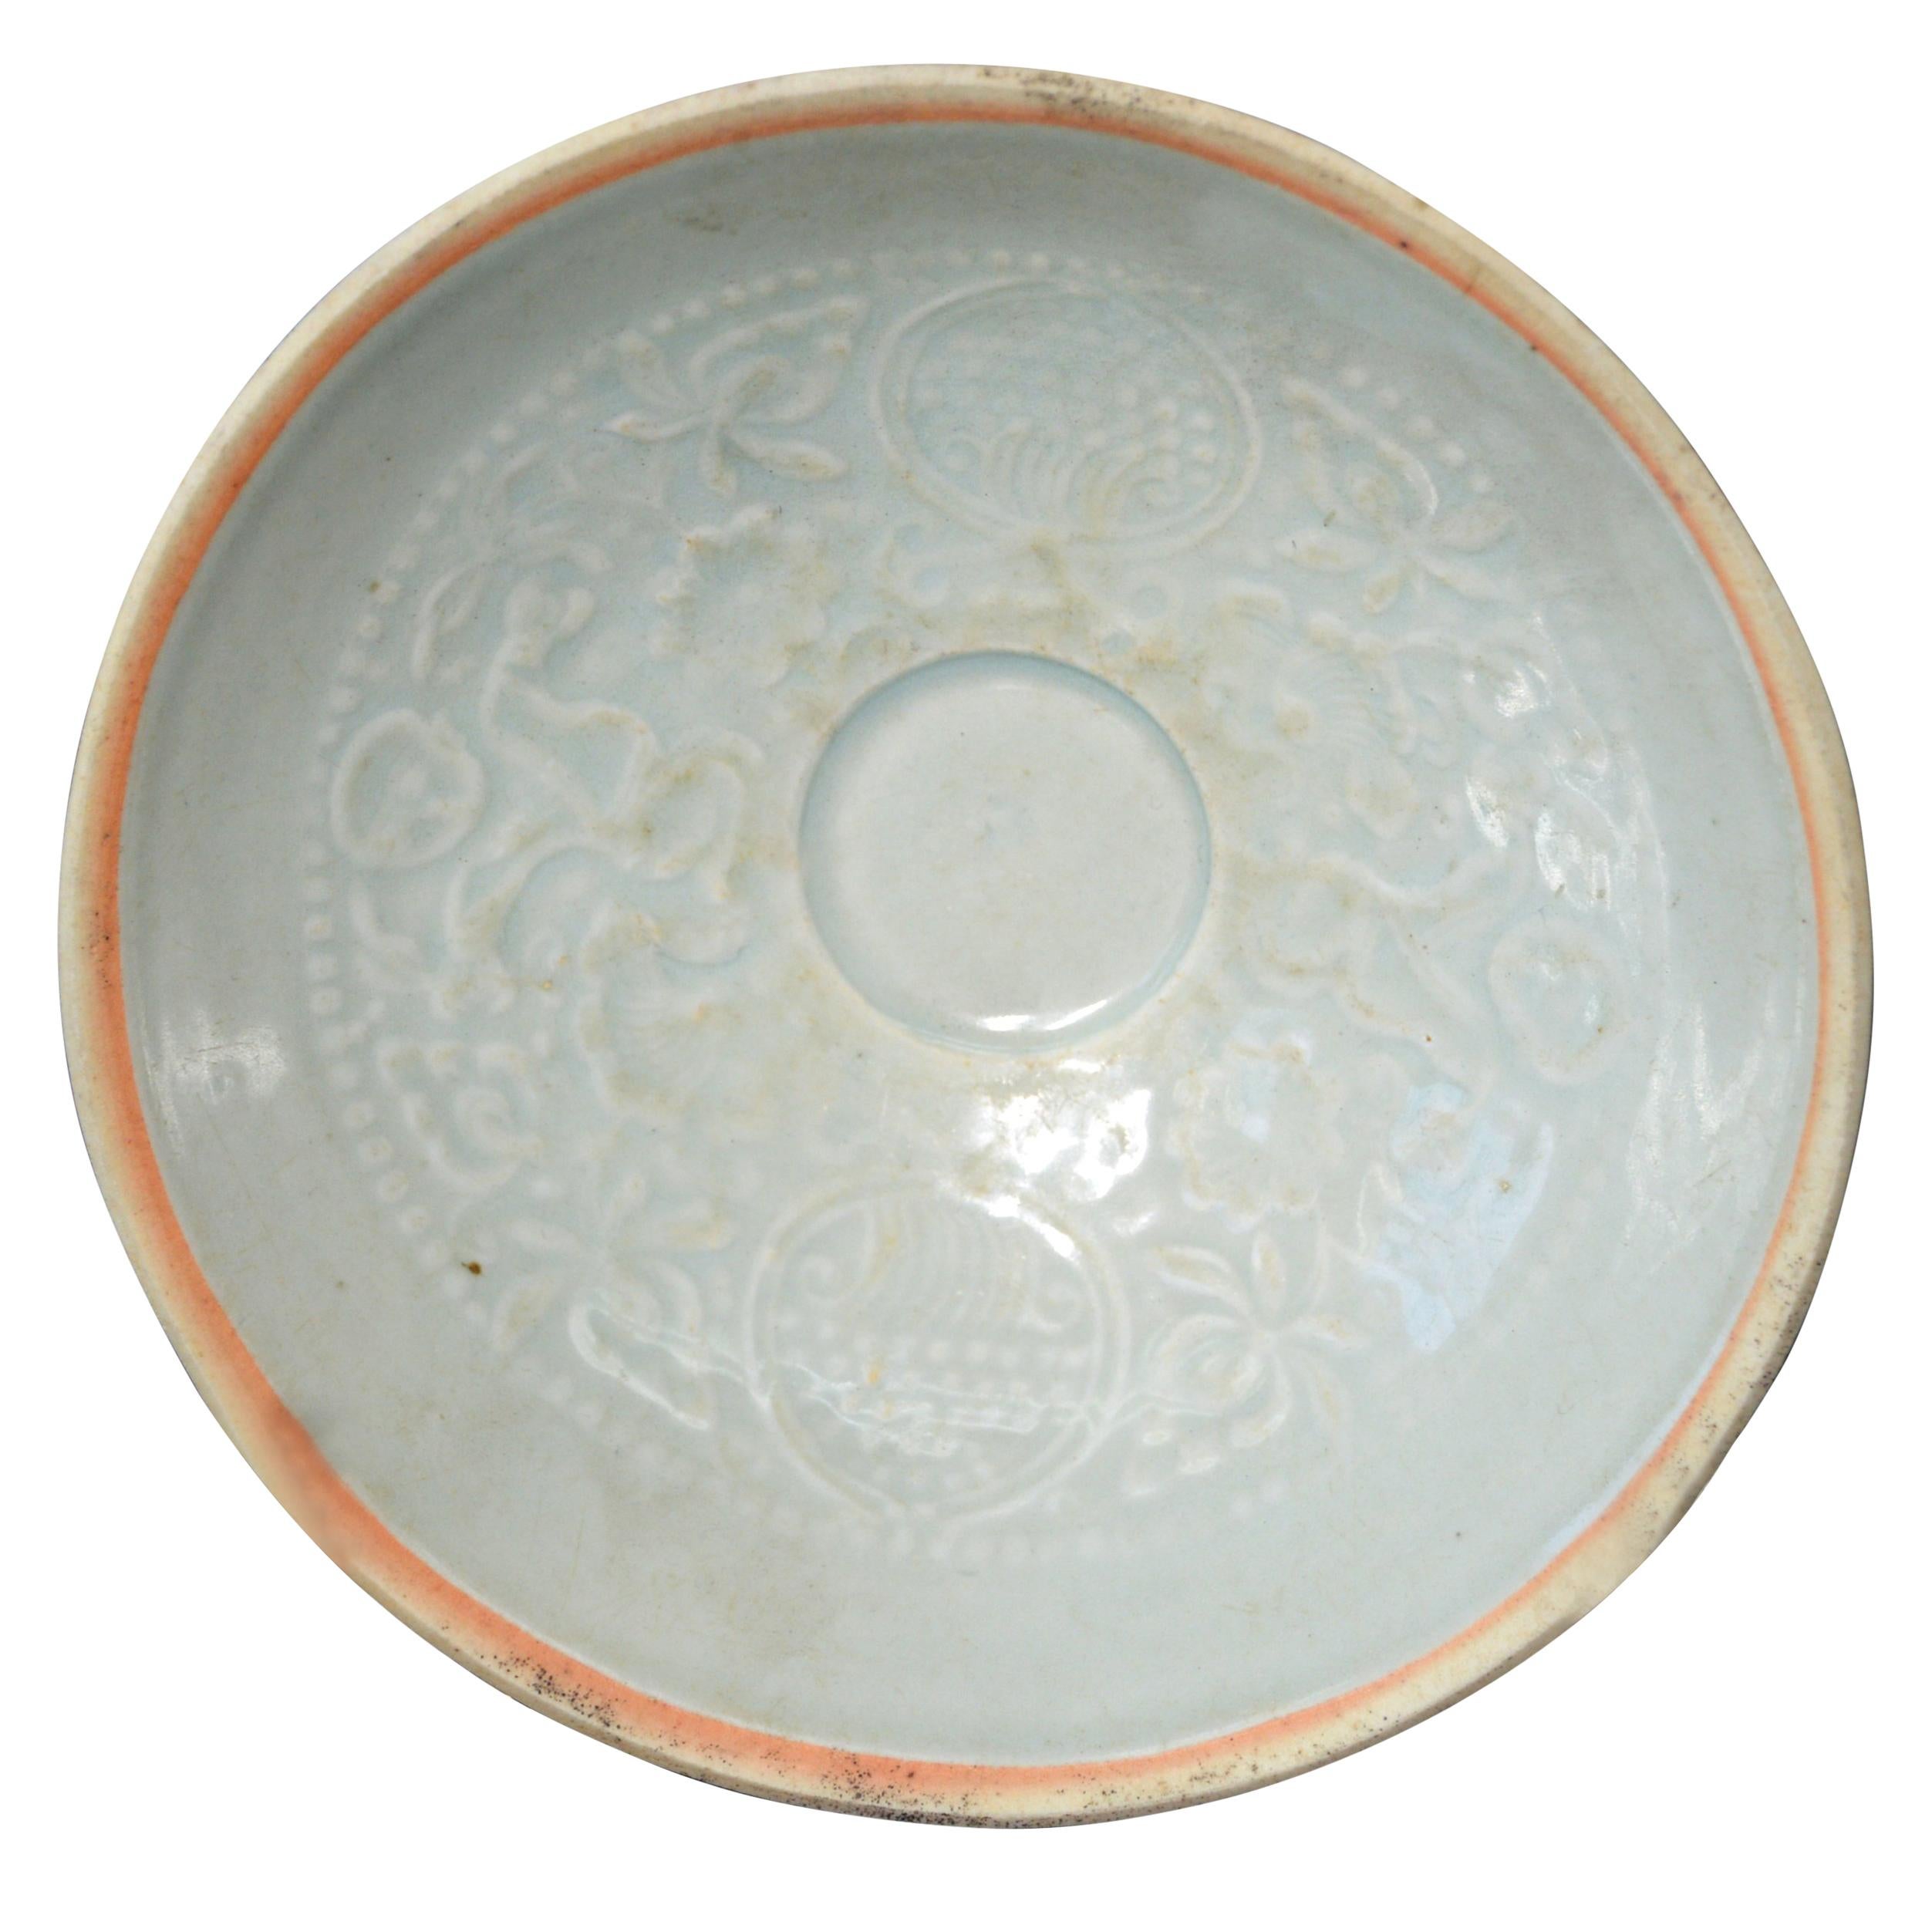 10th-13th Century Song Dynasty Chinese Celadon Porcelain Bowl with Floral Motifs